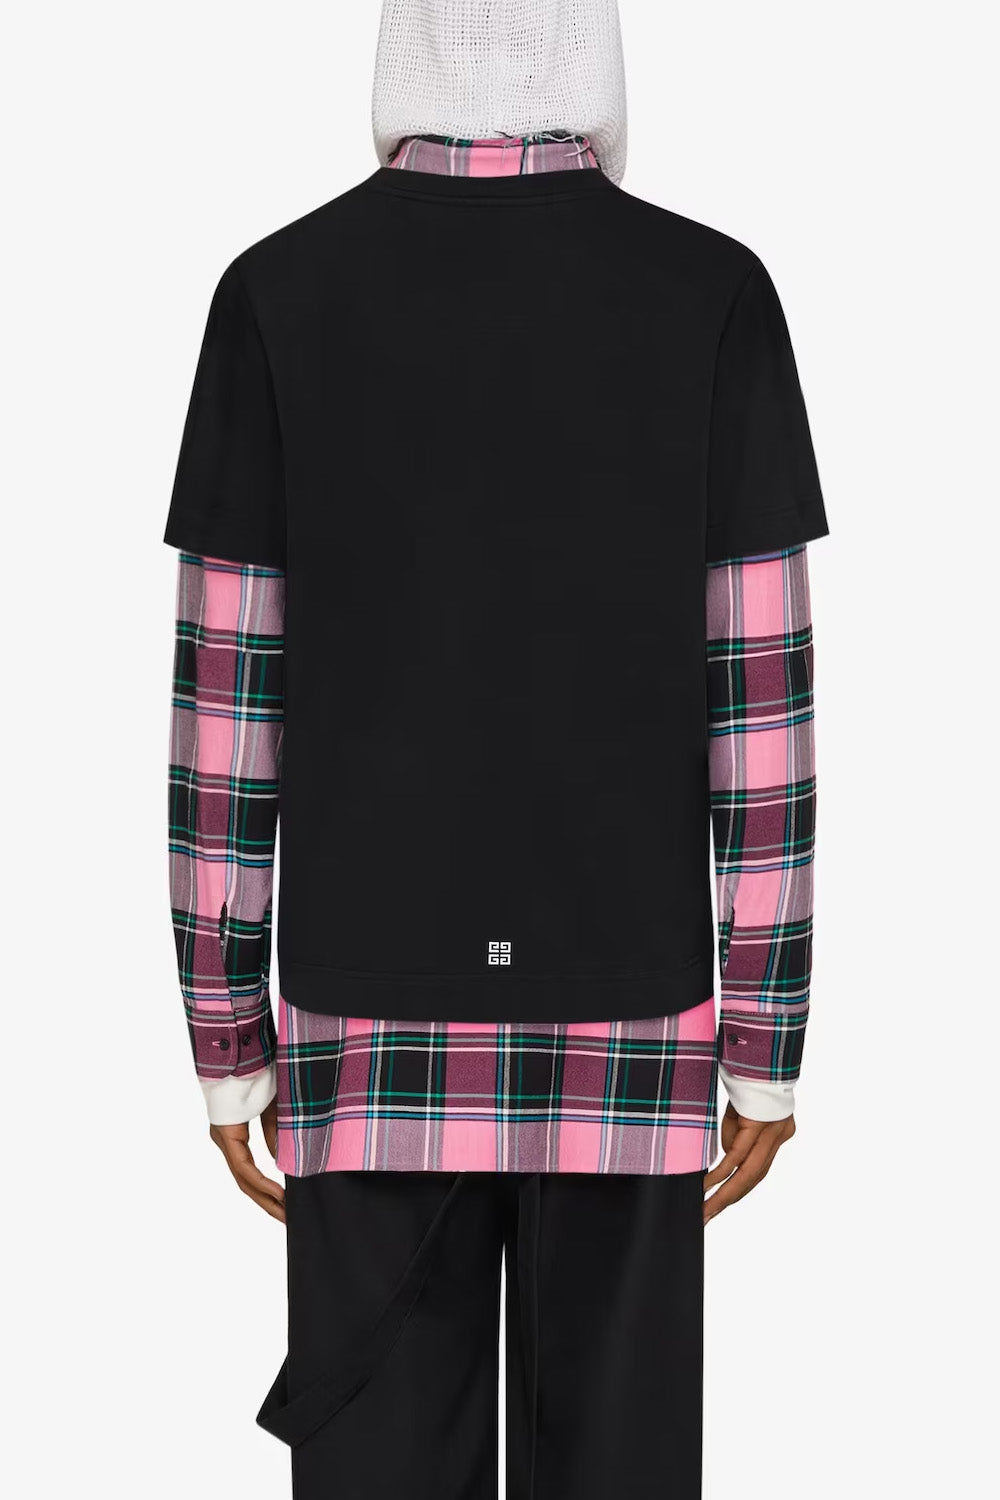 Givenchy Slim fit t-shirt in cotton with GIVENCHY Flames print